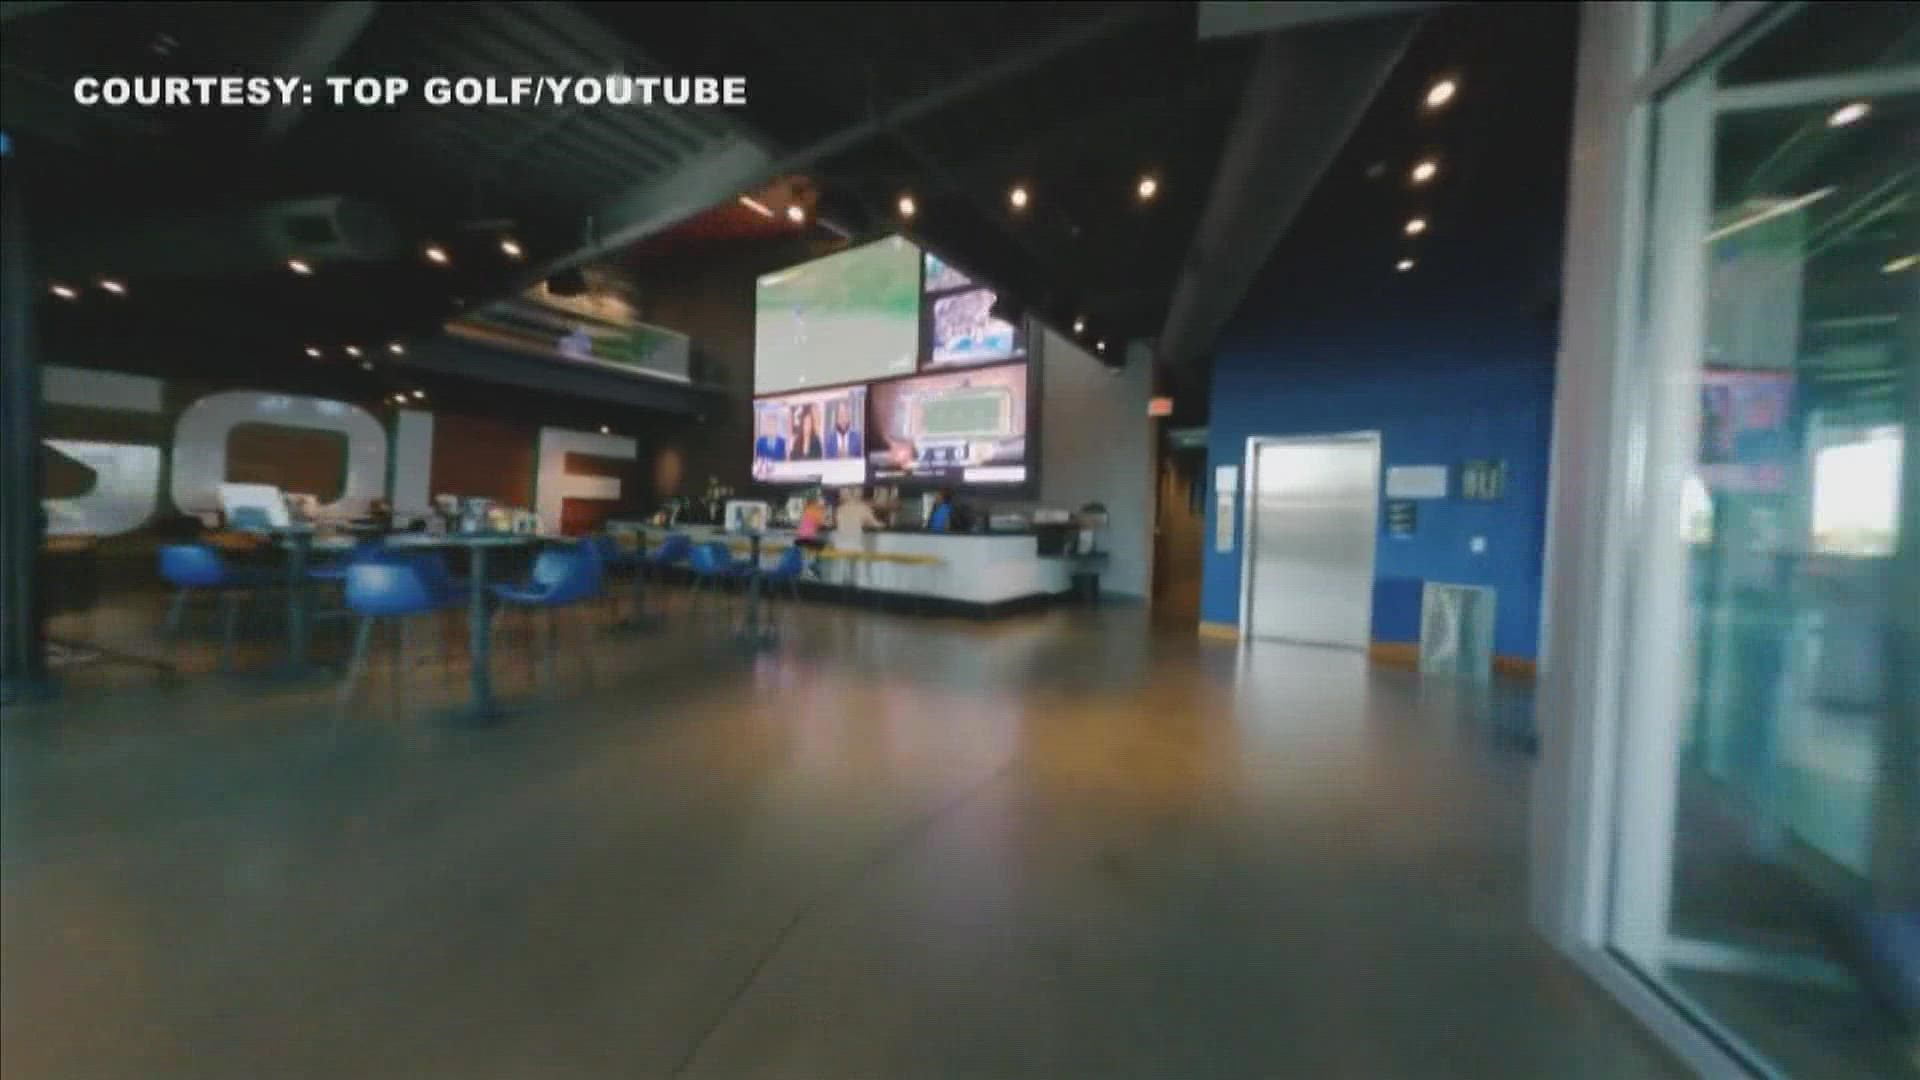 Topgolf describes the experience as one that caters to skilled golfers and  people who haven't golfed before. The slated Memphis location is the fourth in the state.